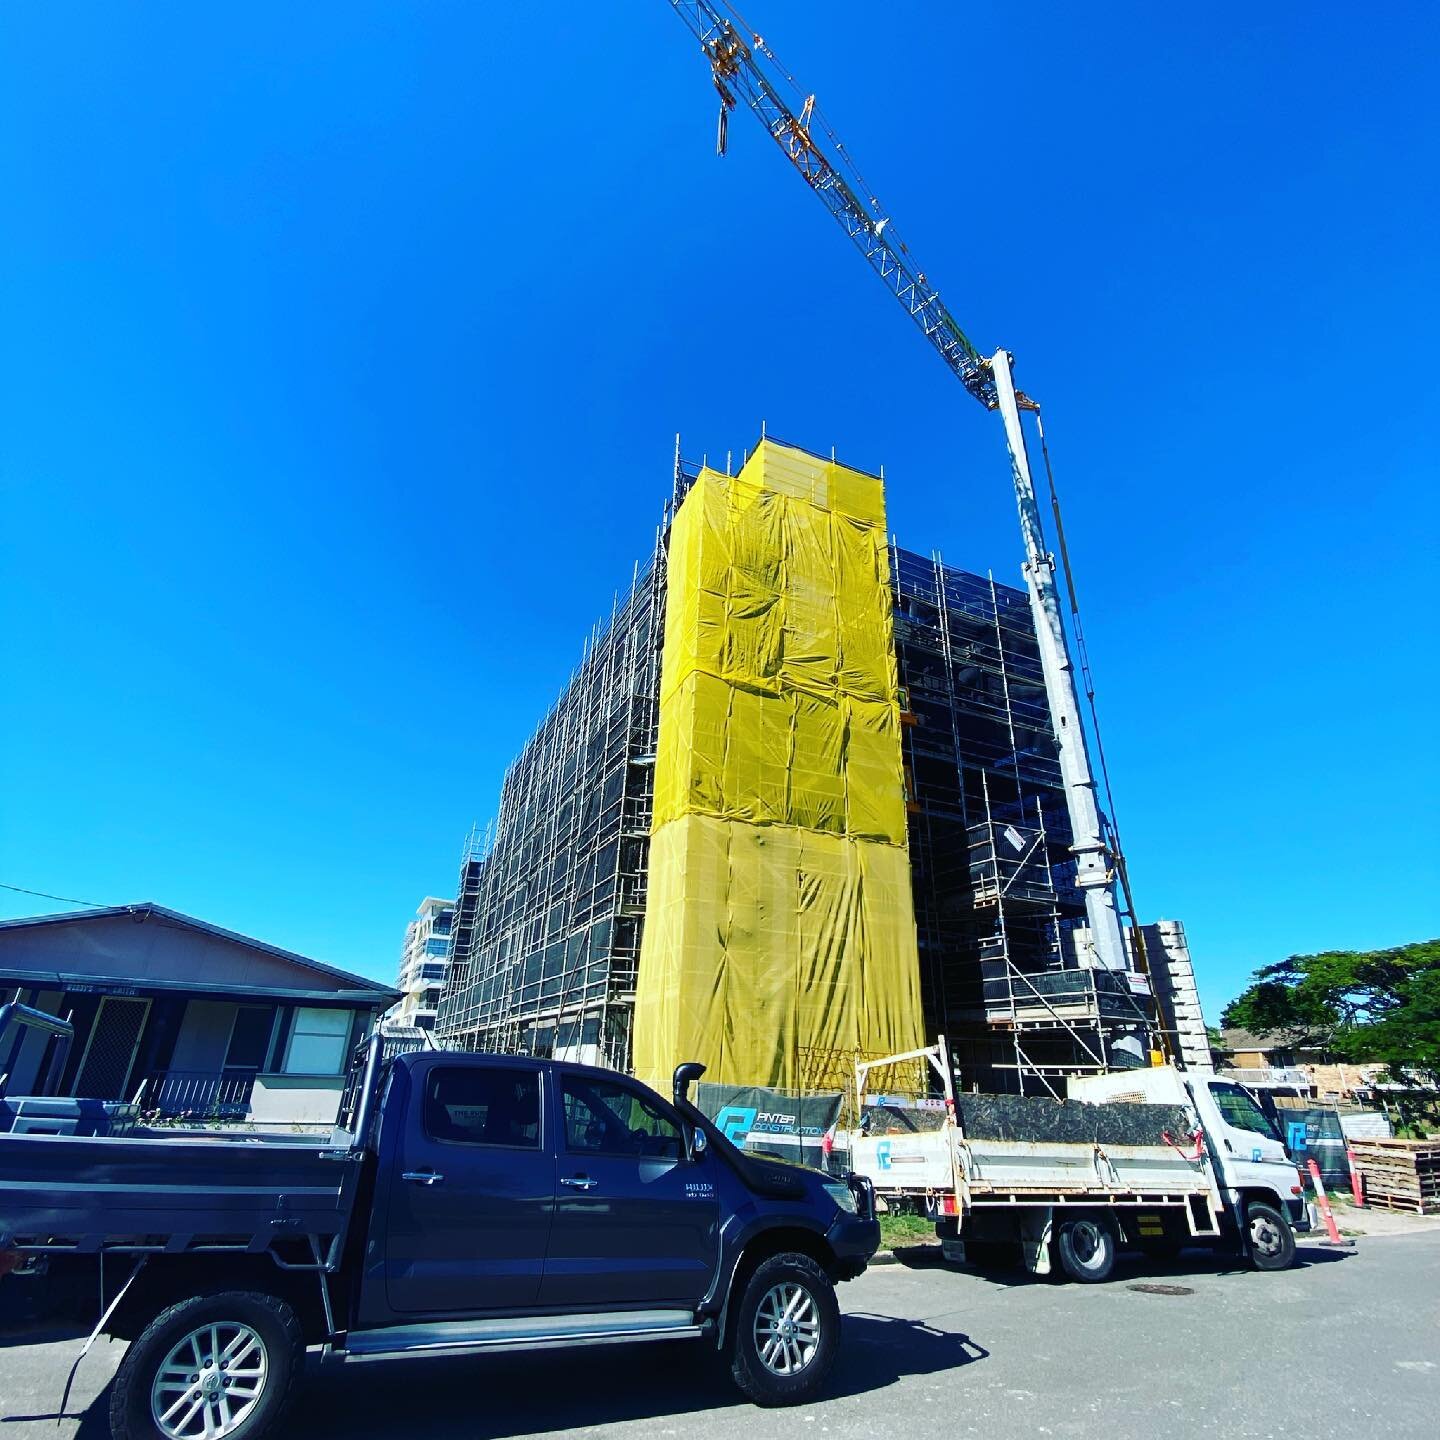 Nothing beats a 🏗 in the sky on a beautiful May day. We love it when projects we work on come out of the ground.